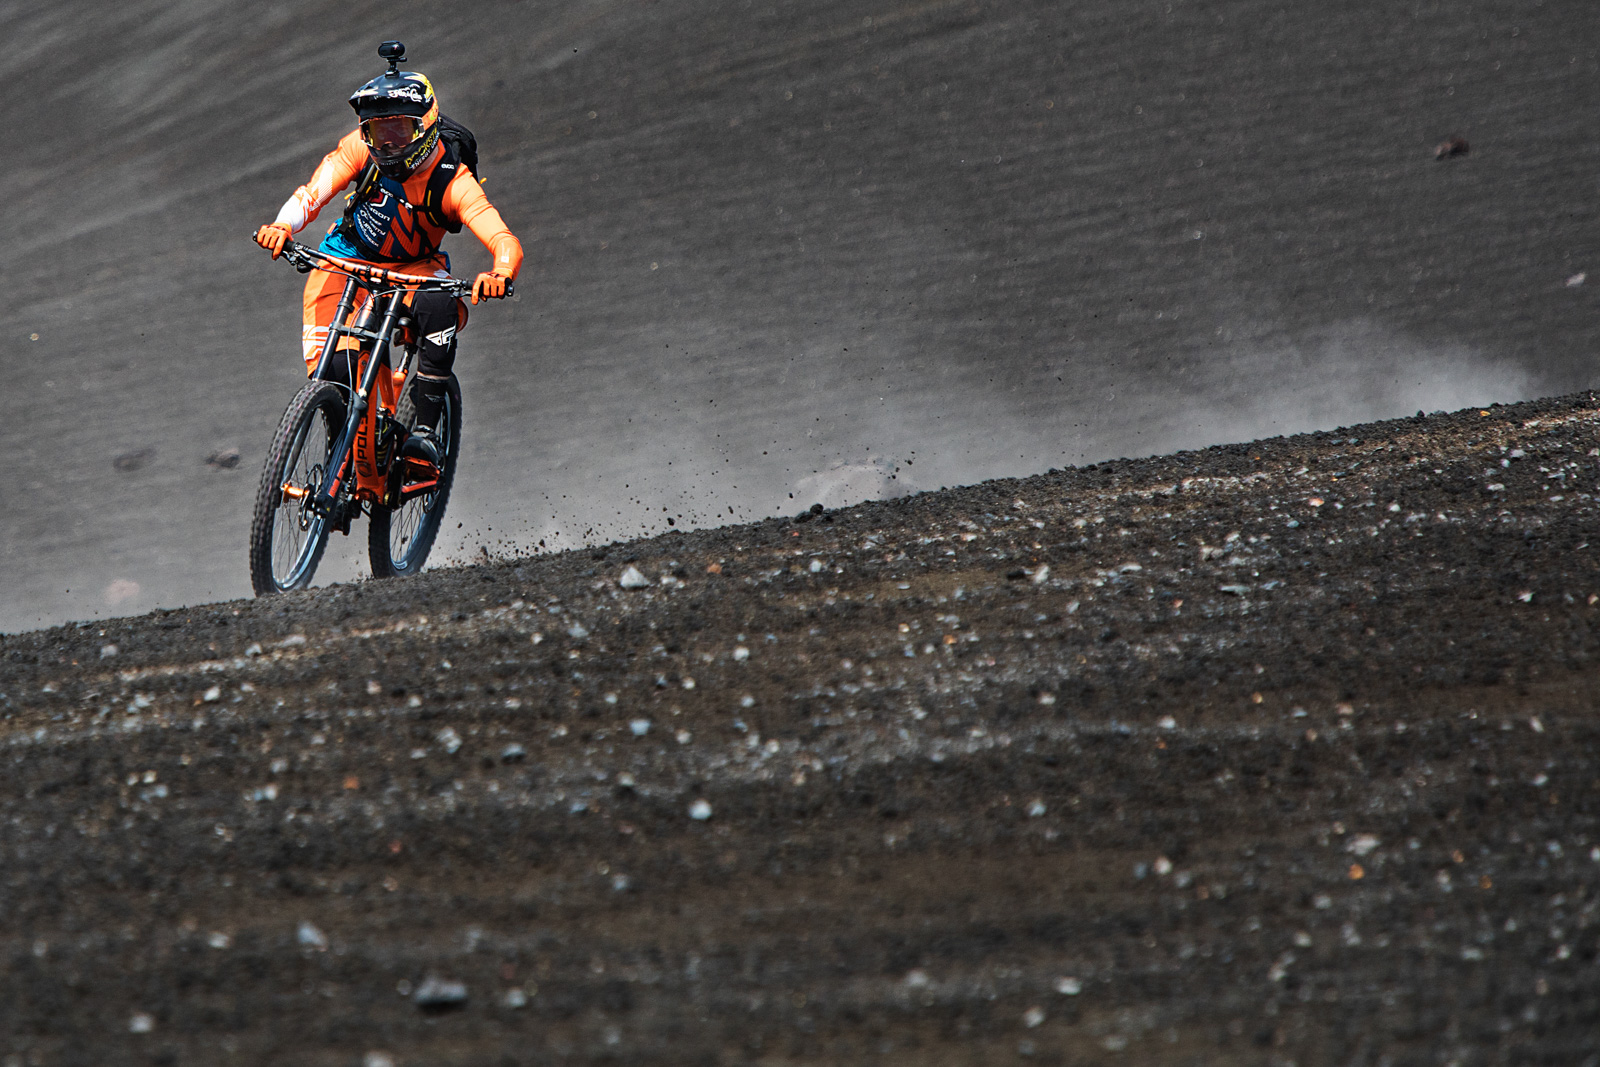 Volcanico mountain bike for Schwalbe and Flor De Cana by Boston based sports photographer Brian Nevins